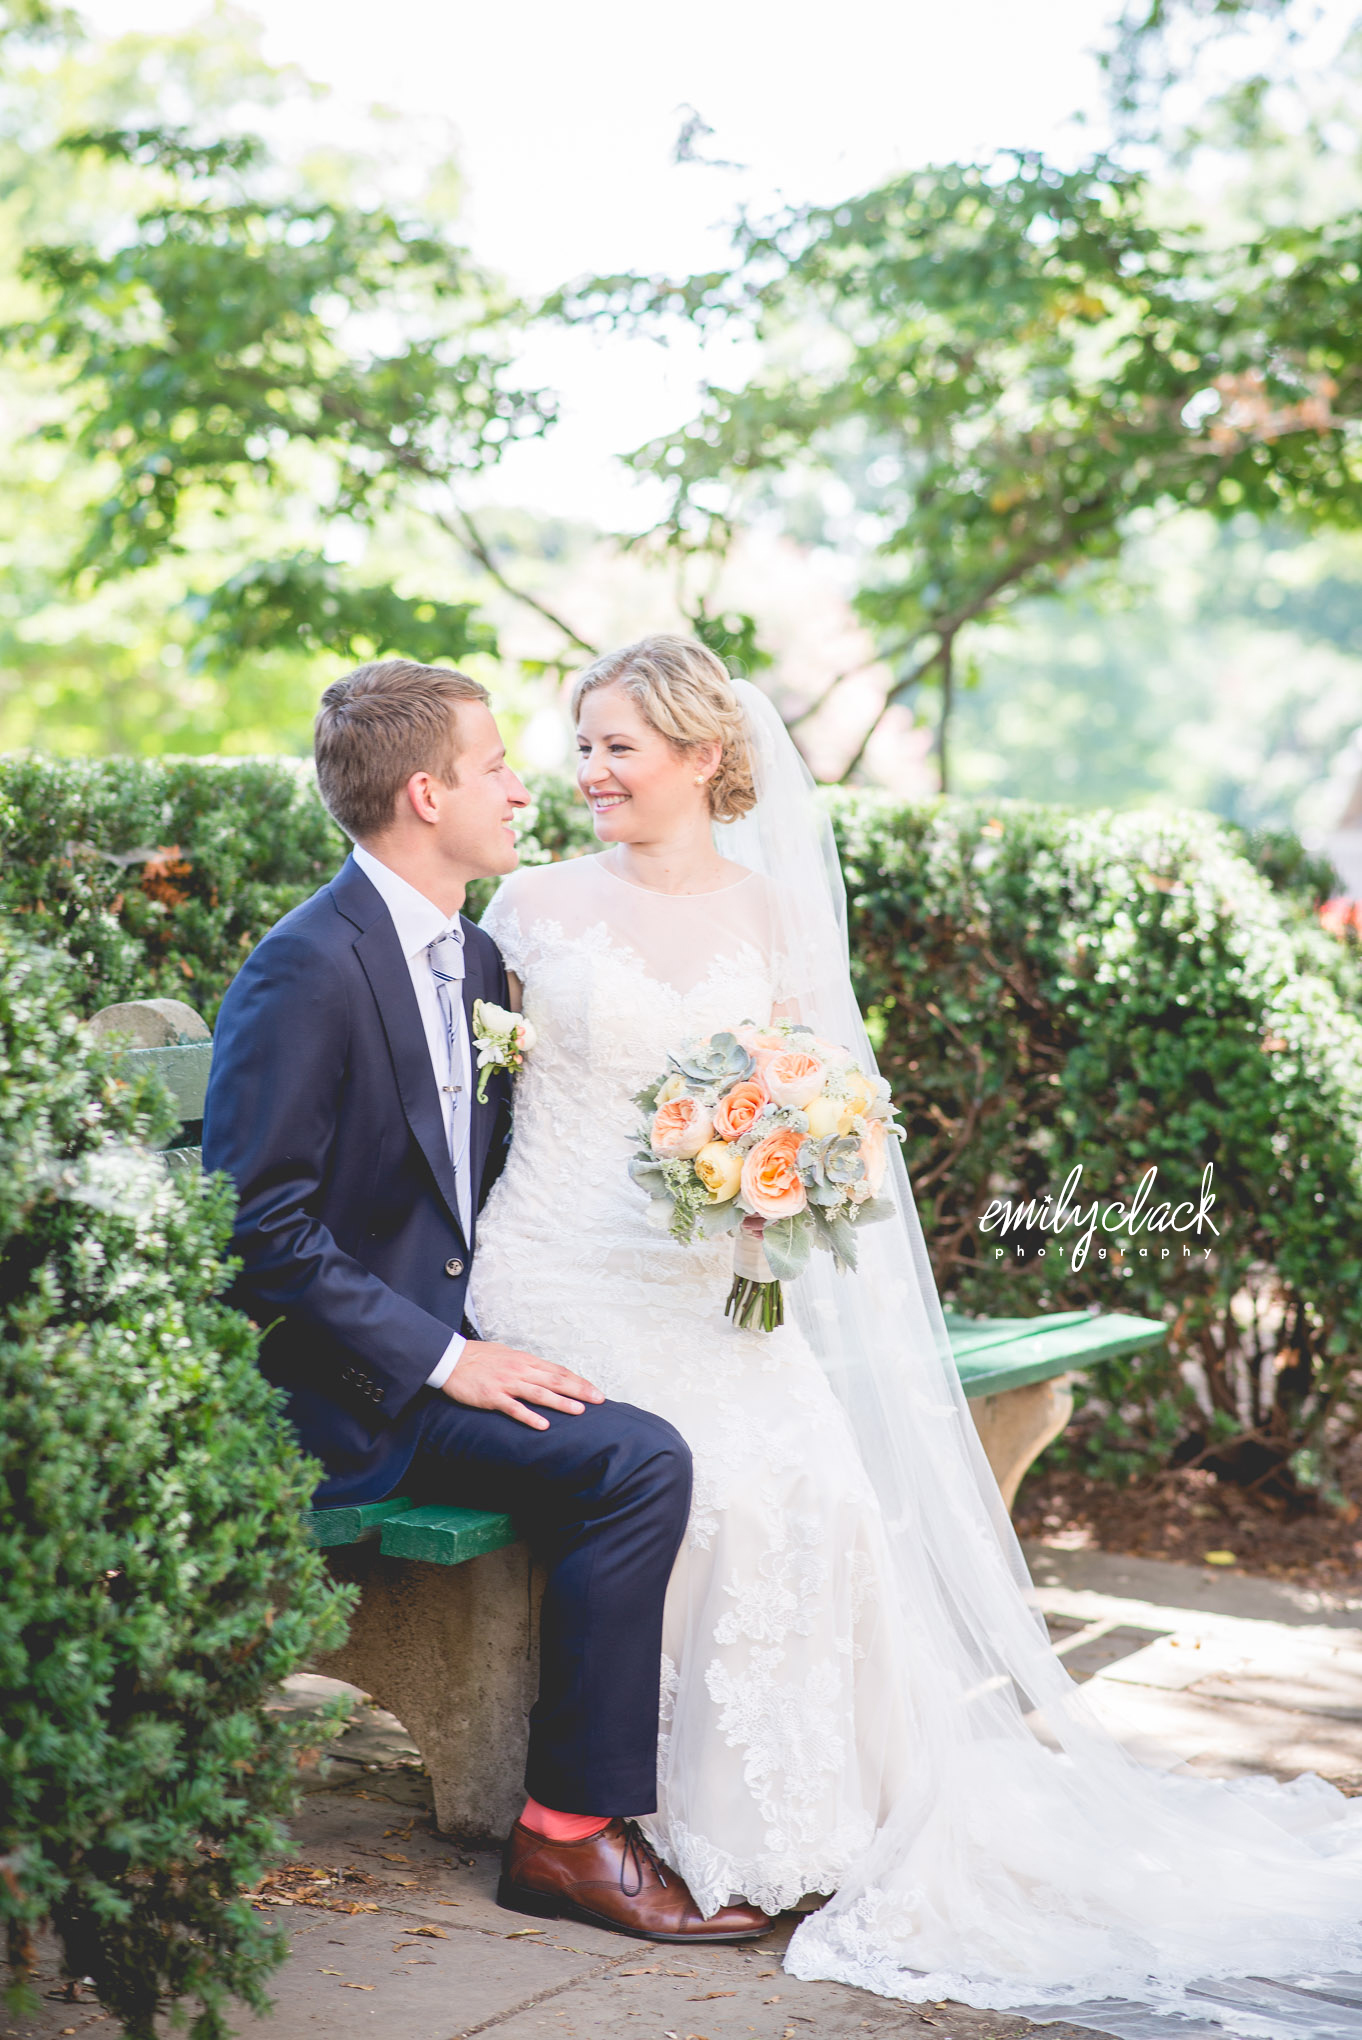   Katie + Doug on July 26, 2014 ♥ Emily Clack Photography at Dahlgren Chapel of the Sacred Heart (Georgetown University)  